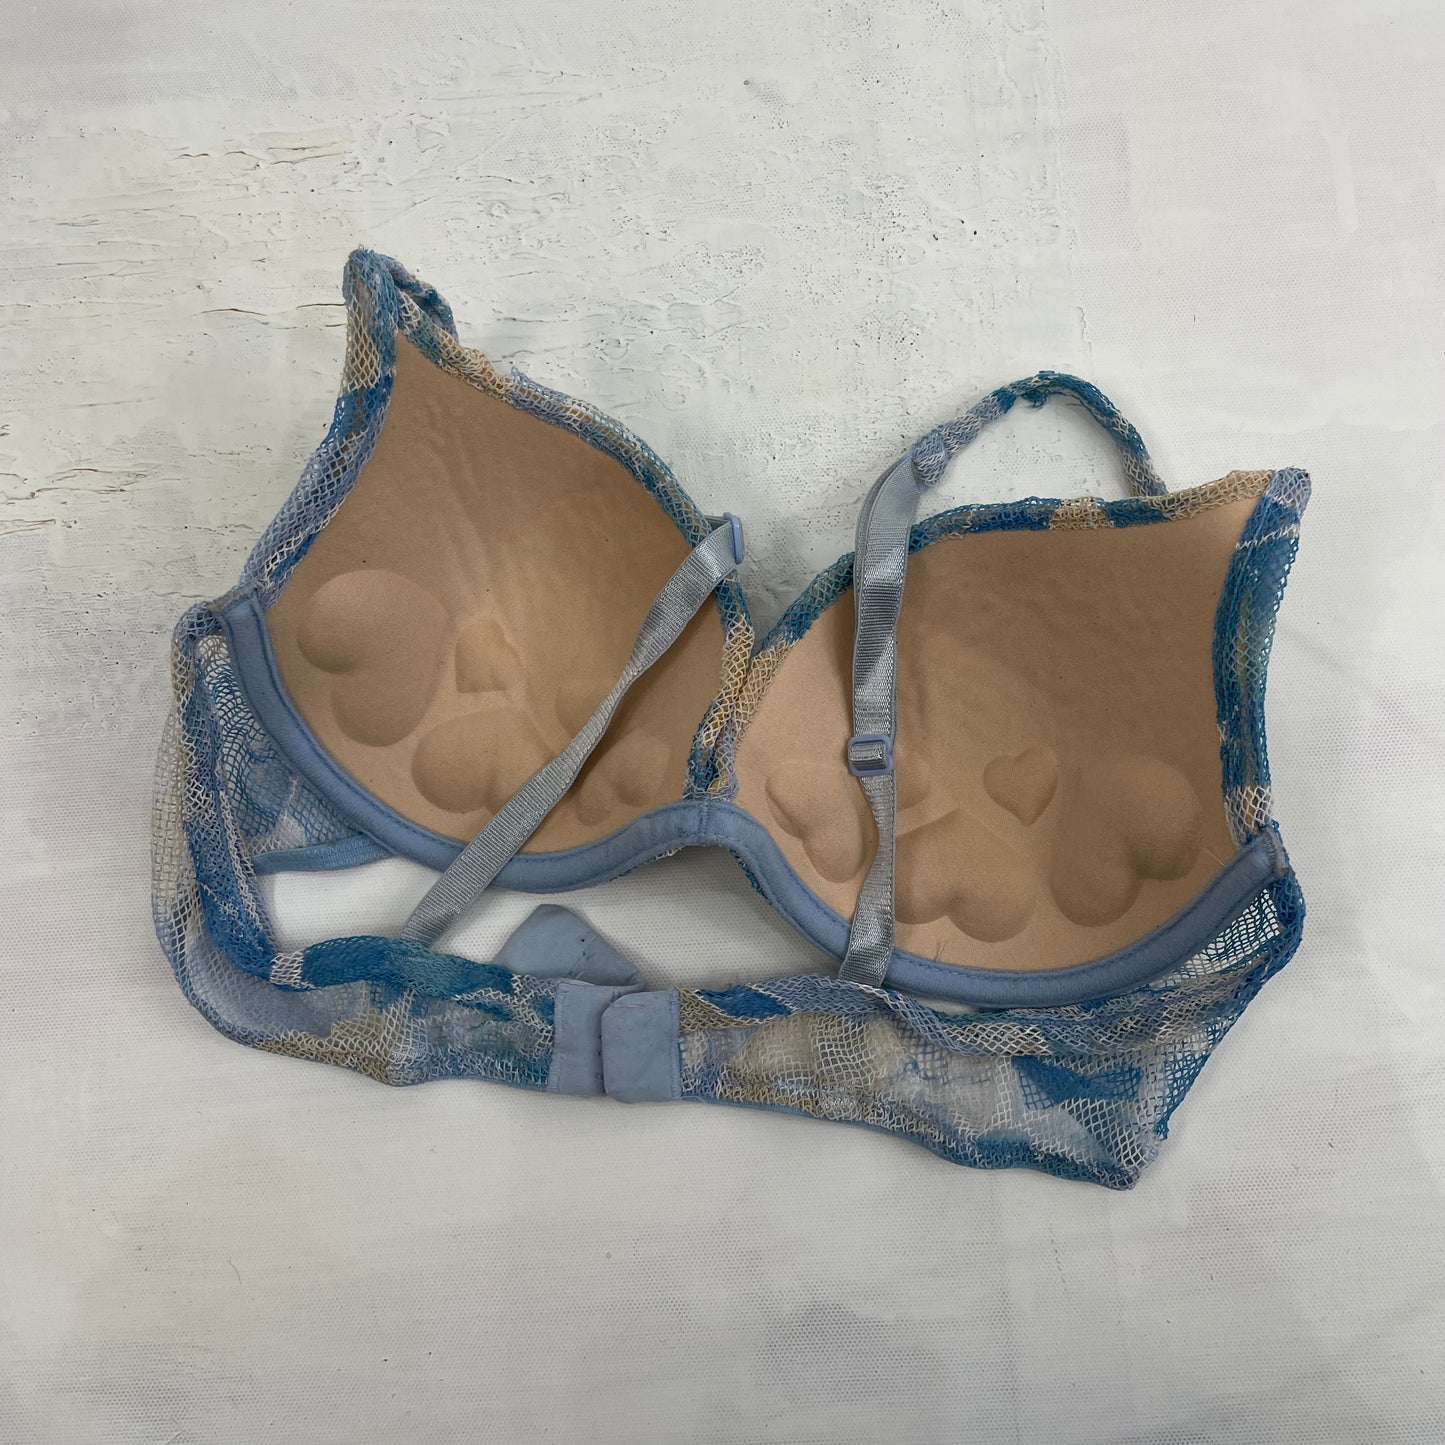 GORPCORE DROP | small blue and beige mesh patterned bra